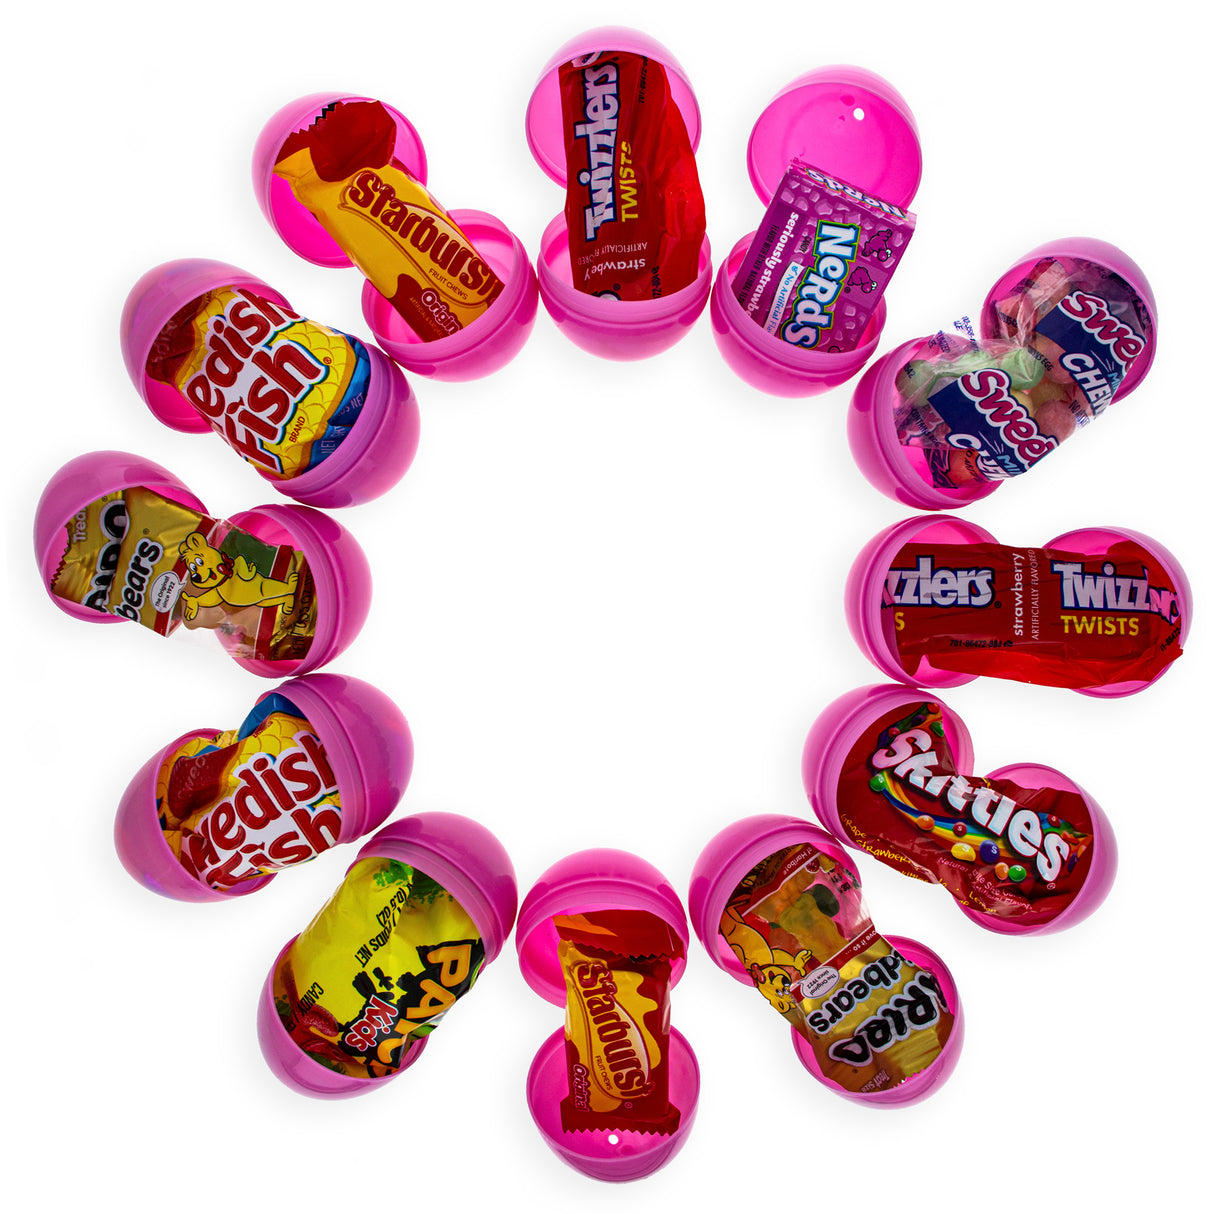 12 Pink Plastic Easter Eggs Filled with Premium Candy Delights in Pink color, Oval shape